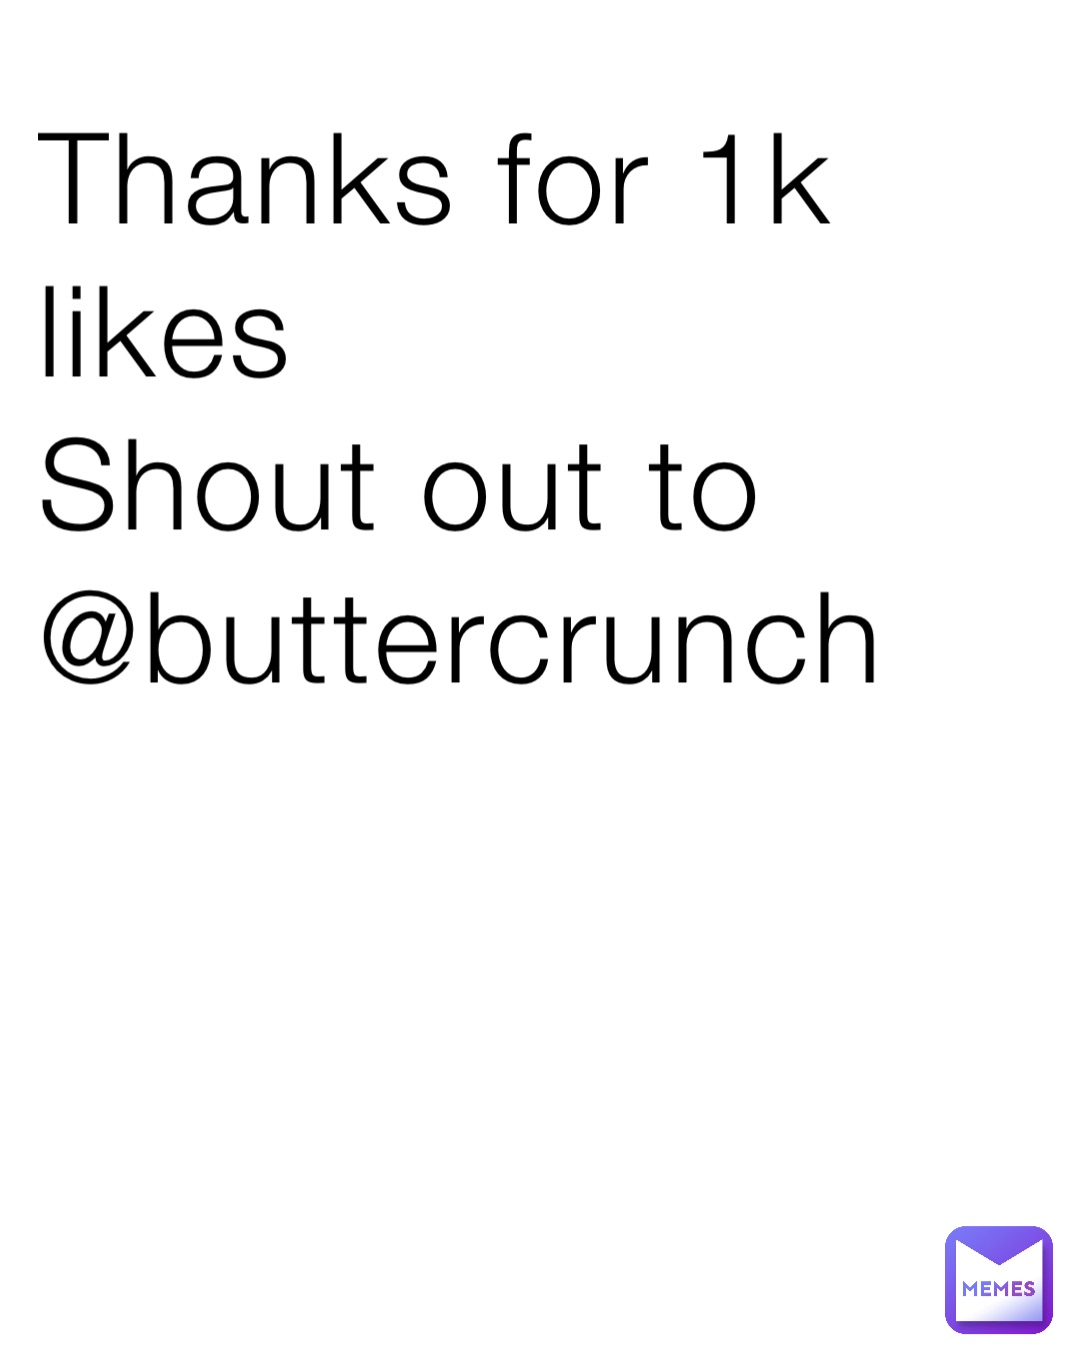 Thanks for 1k likes 
Shout out to @buttercrunch